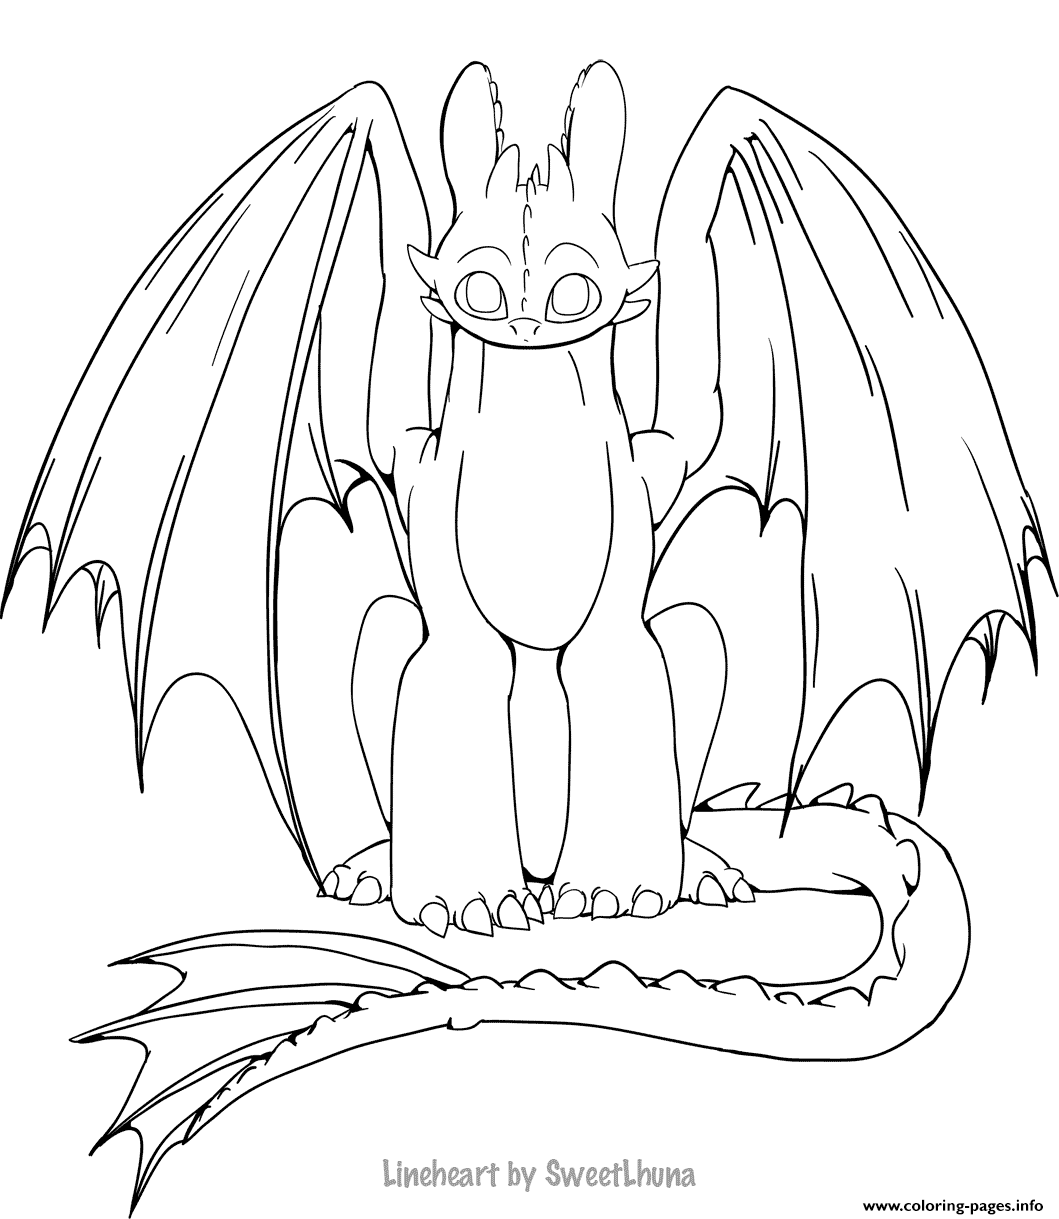 How To Train Your Dragon 3 Coloring page Printable